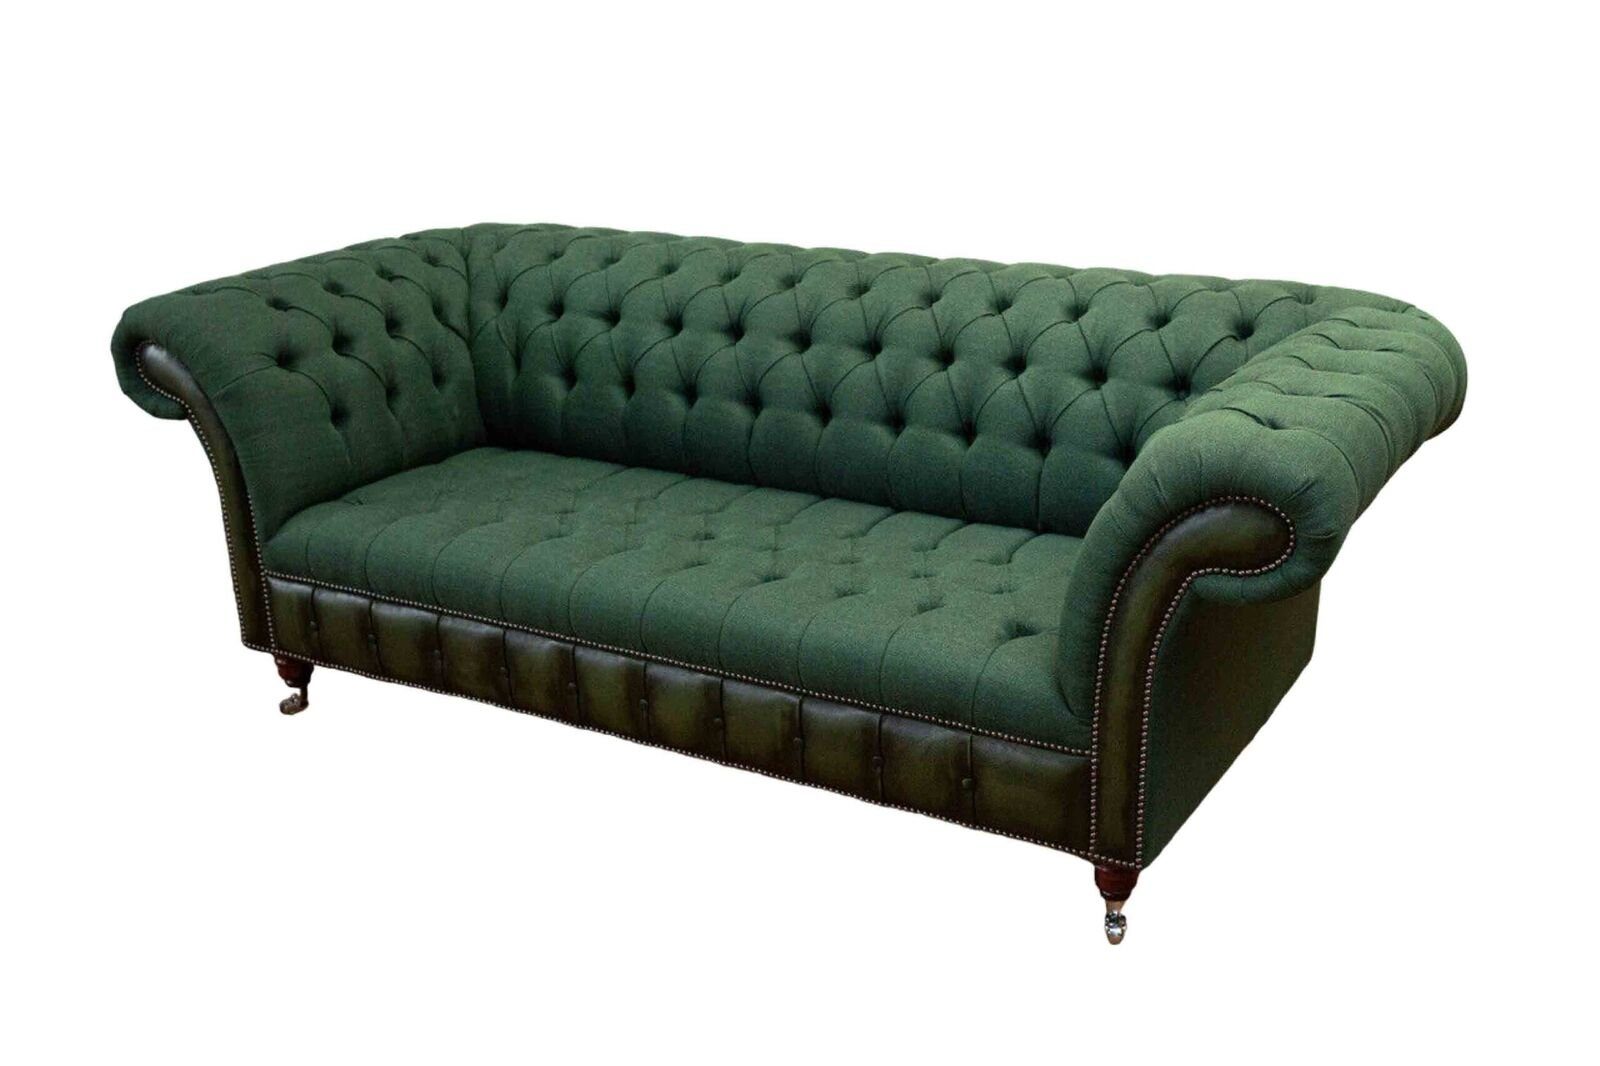 JVmoebel Sofa Grünes Chesterfield Sofa Polster Made 3 Stoff Sitzer Couch Couchen, Europe Leder in